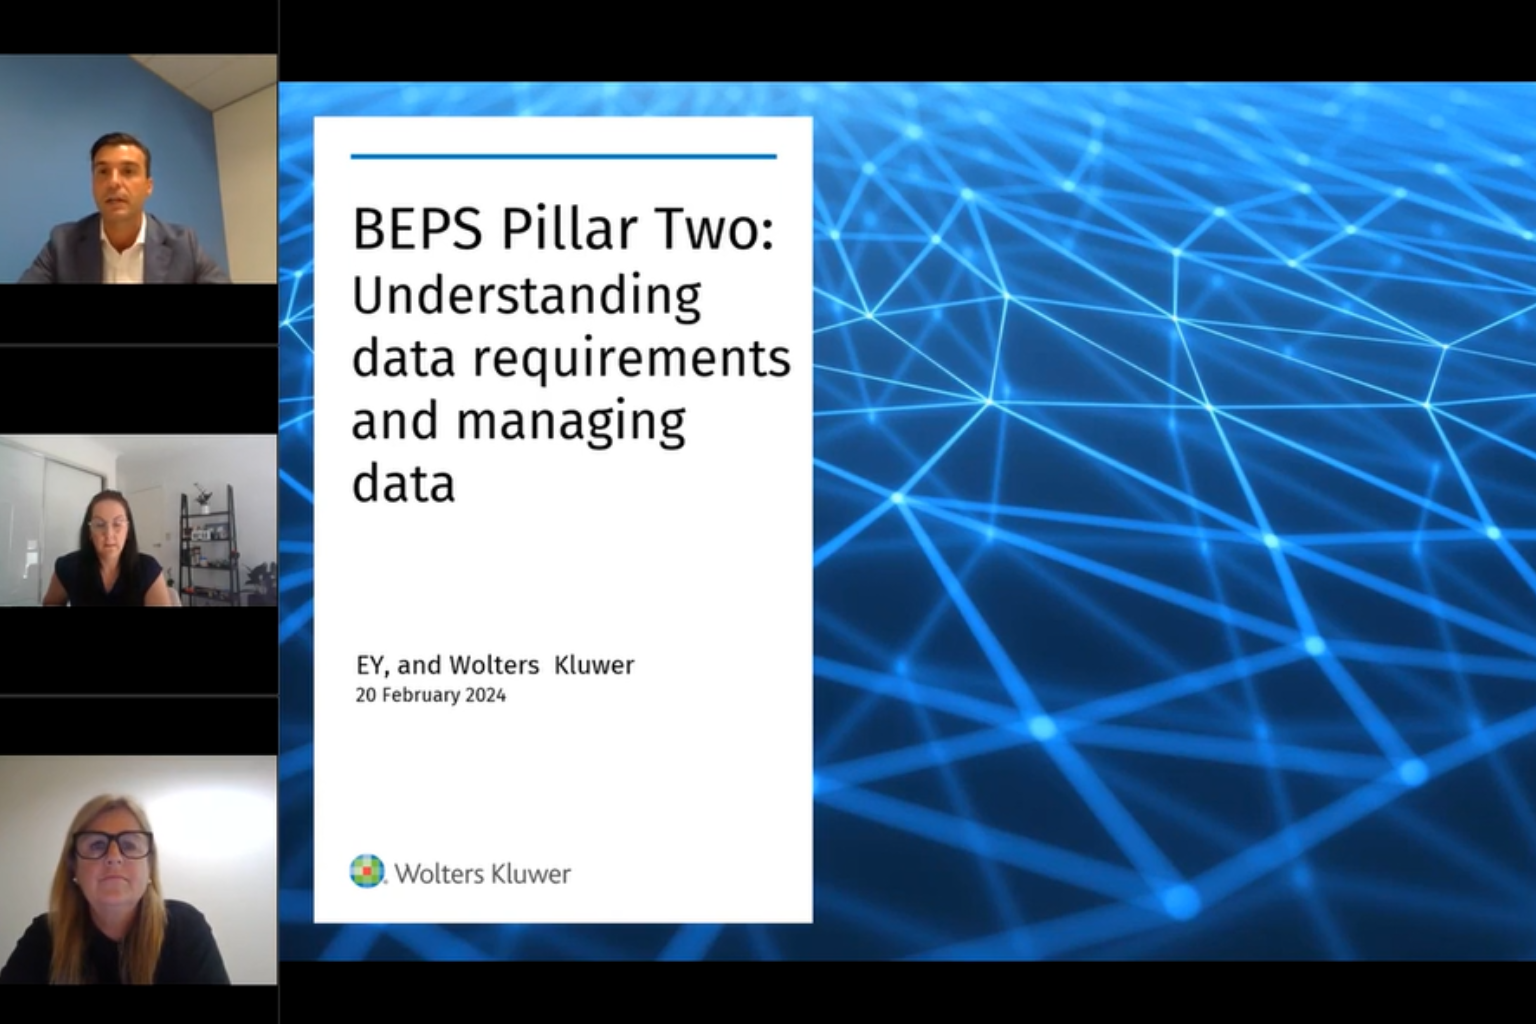 Beps Pillar Two: Understanding data requirements and managing data